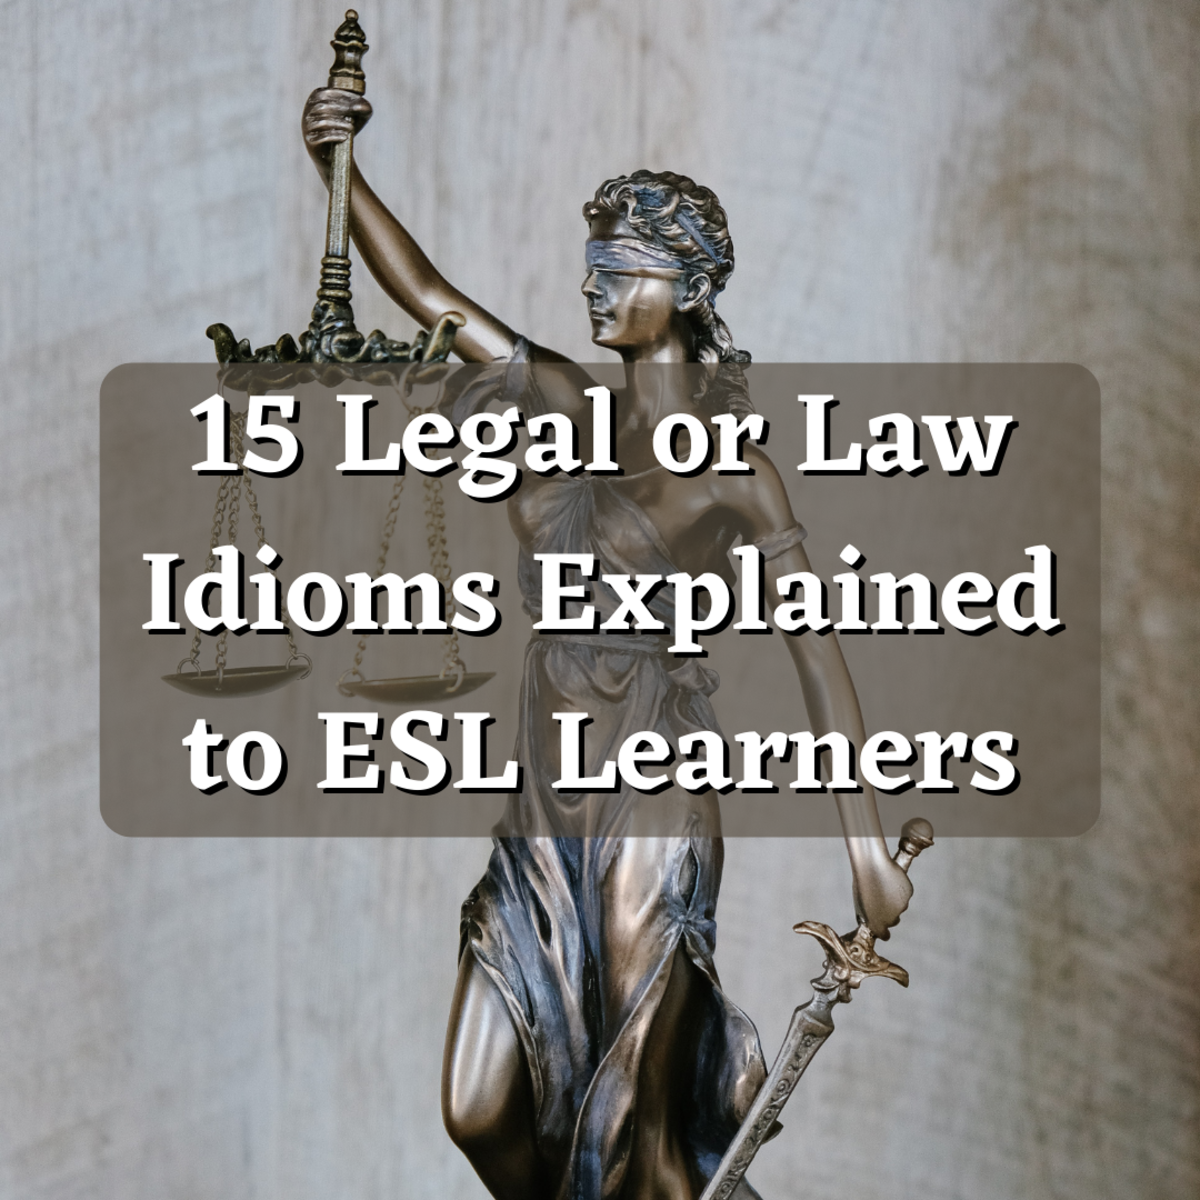 15 Legal or Law Idioms Explained to ESL Learners - Owlcation